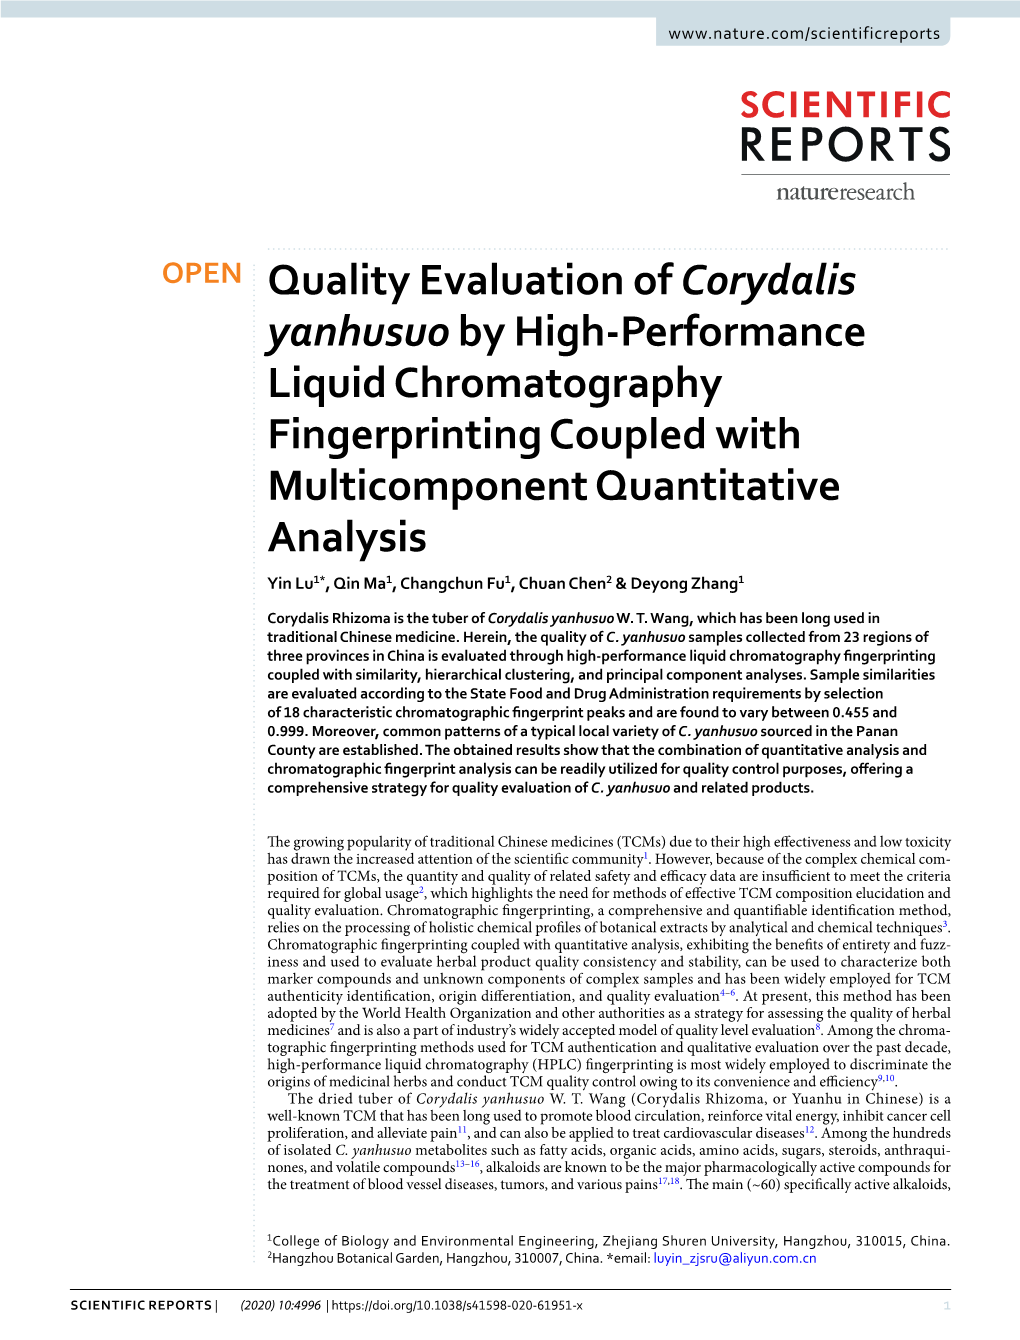 Quality Evaluation of Corydalis Yanhusuo by High-Performance